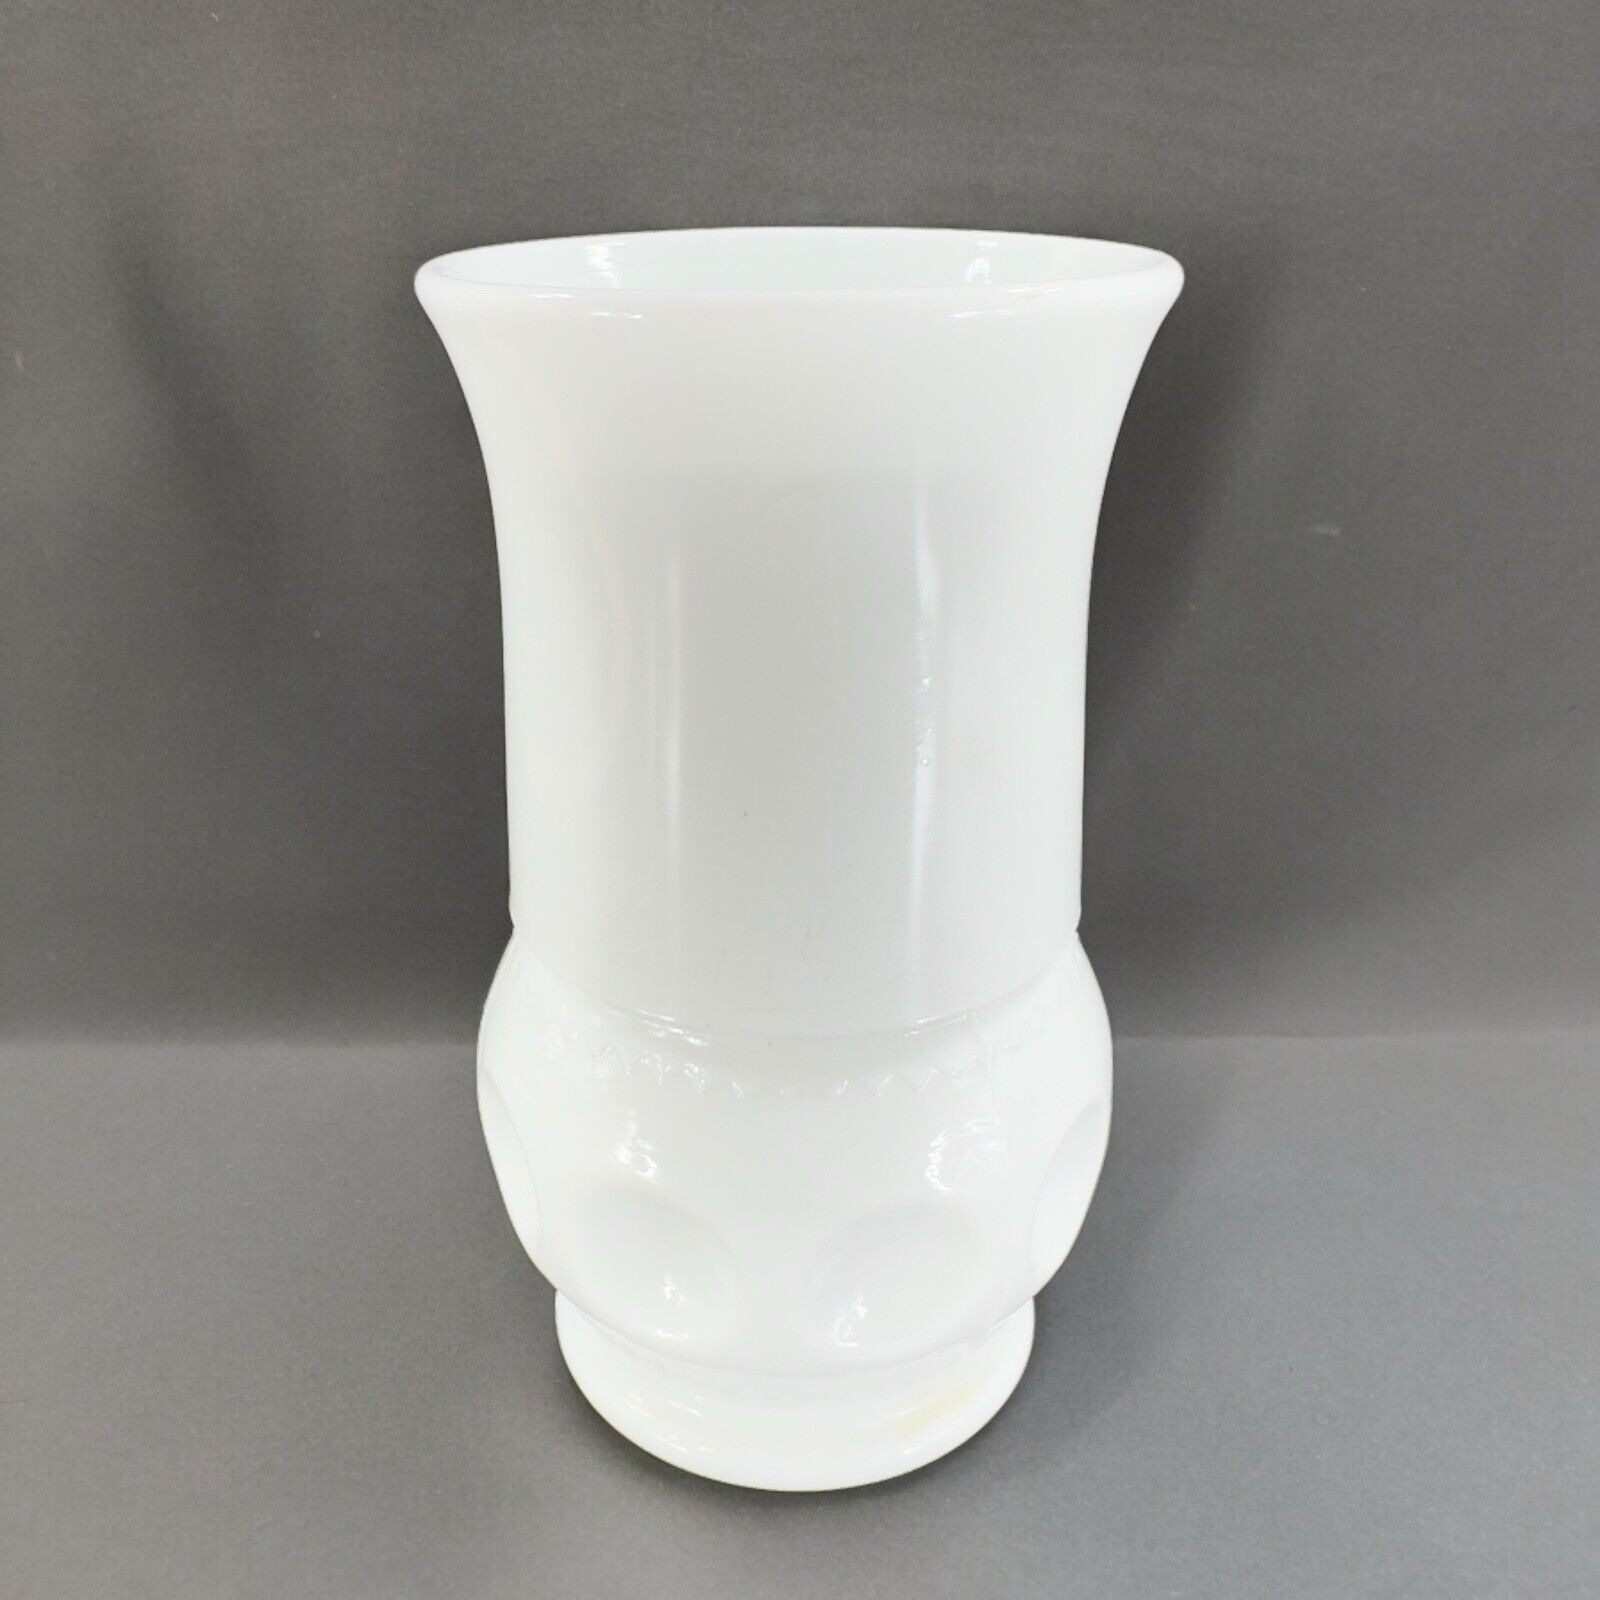 Vintage White Milk Glass Vase Vessel With Coin Dotted Pattern Bottom Glass Decor